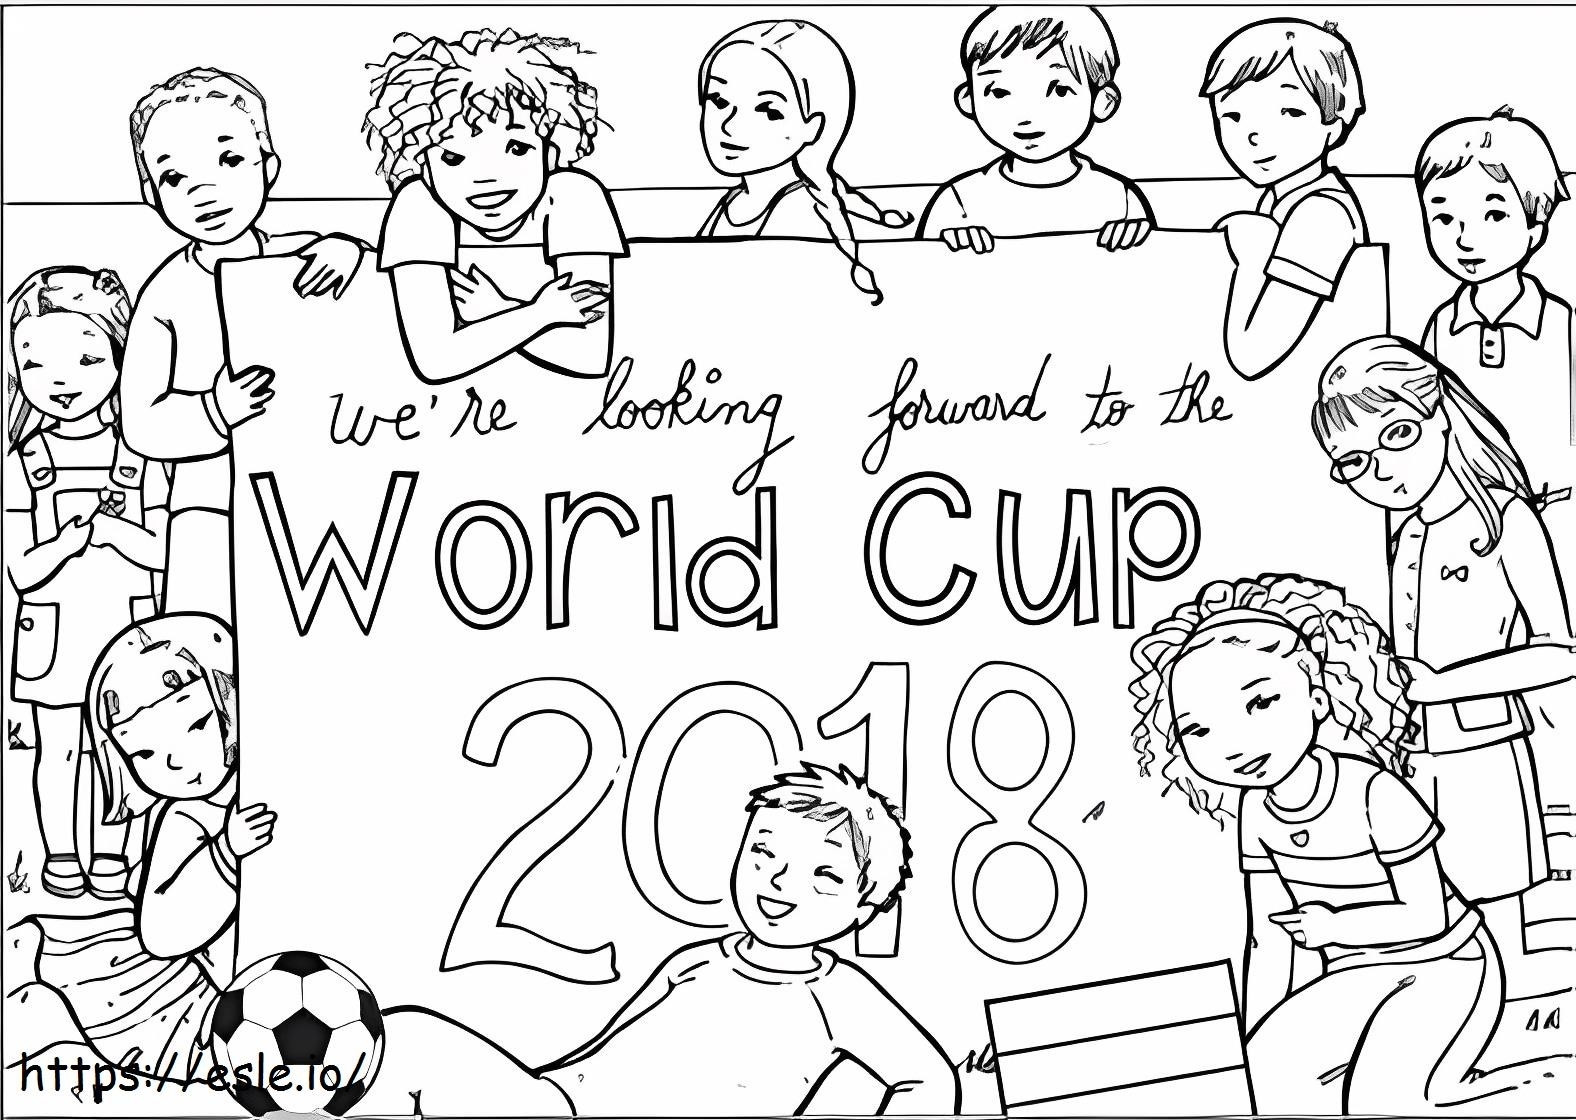 1528776580 Wca4 coloring page